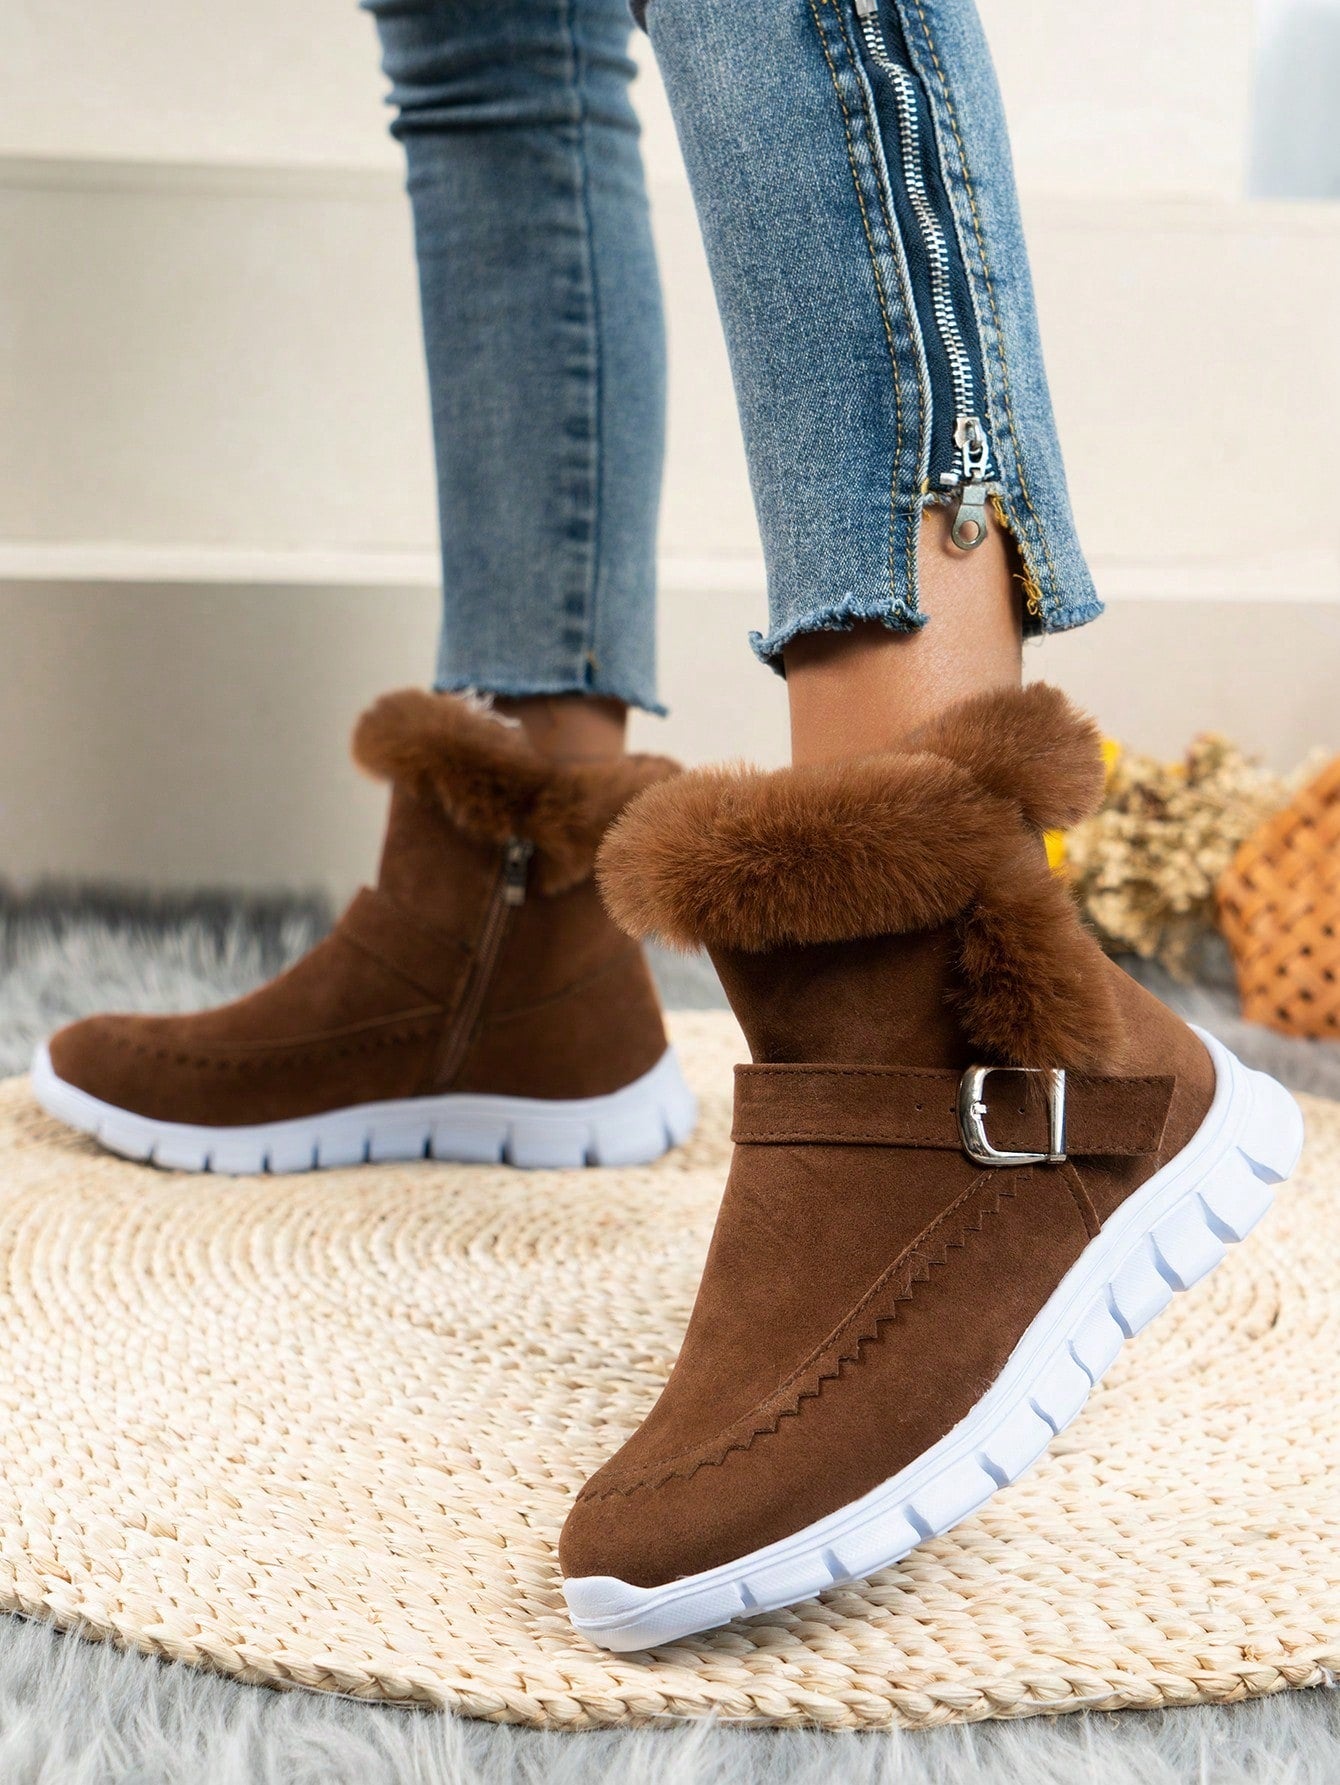 Buckle Decor Zipper Side Teddy Lined Shoes For Women, Winter Thermal Insulated Snow Boots